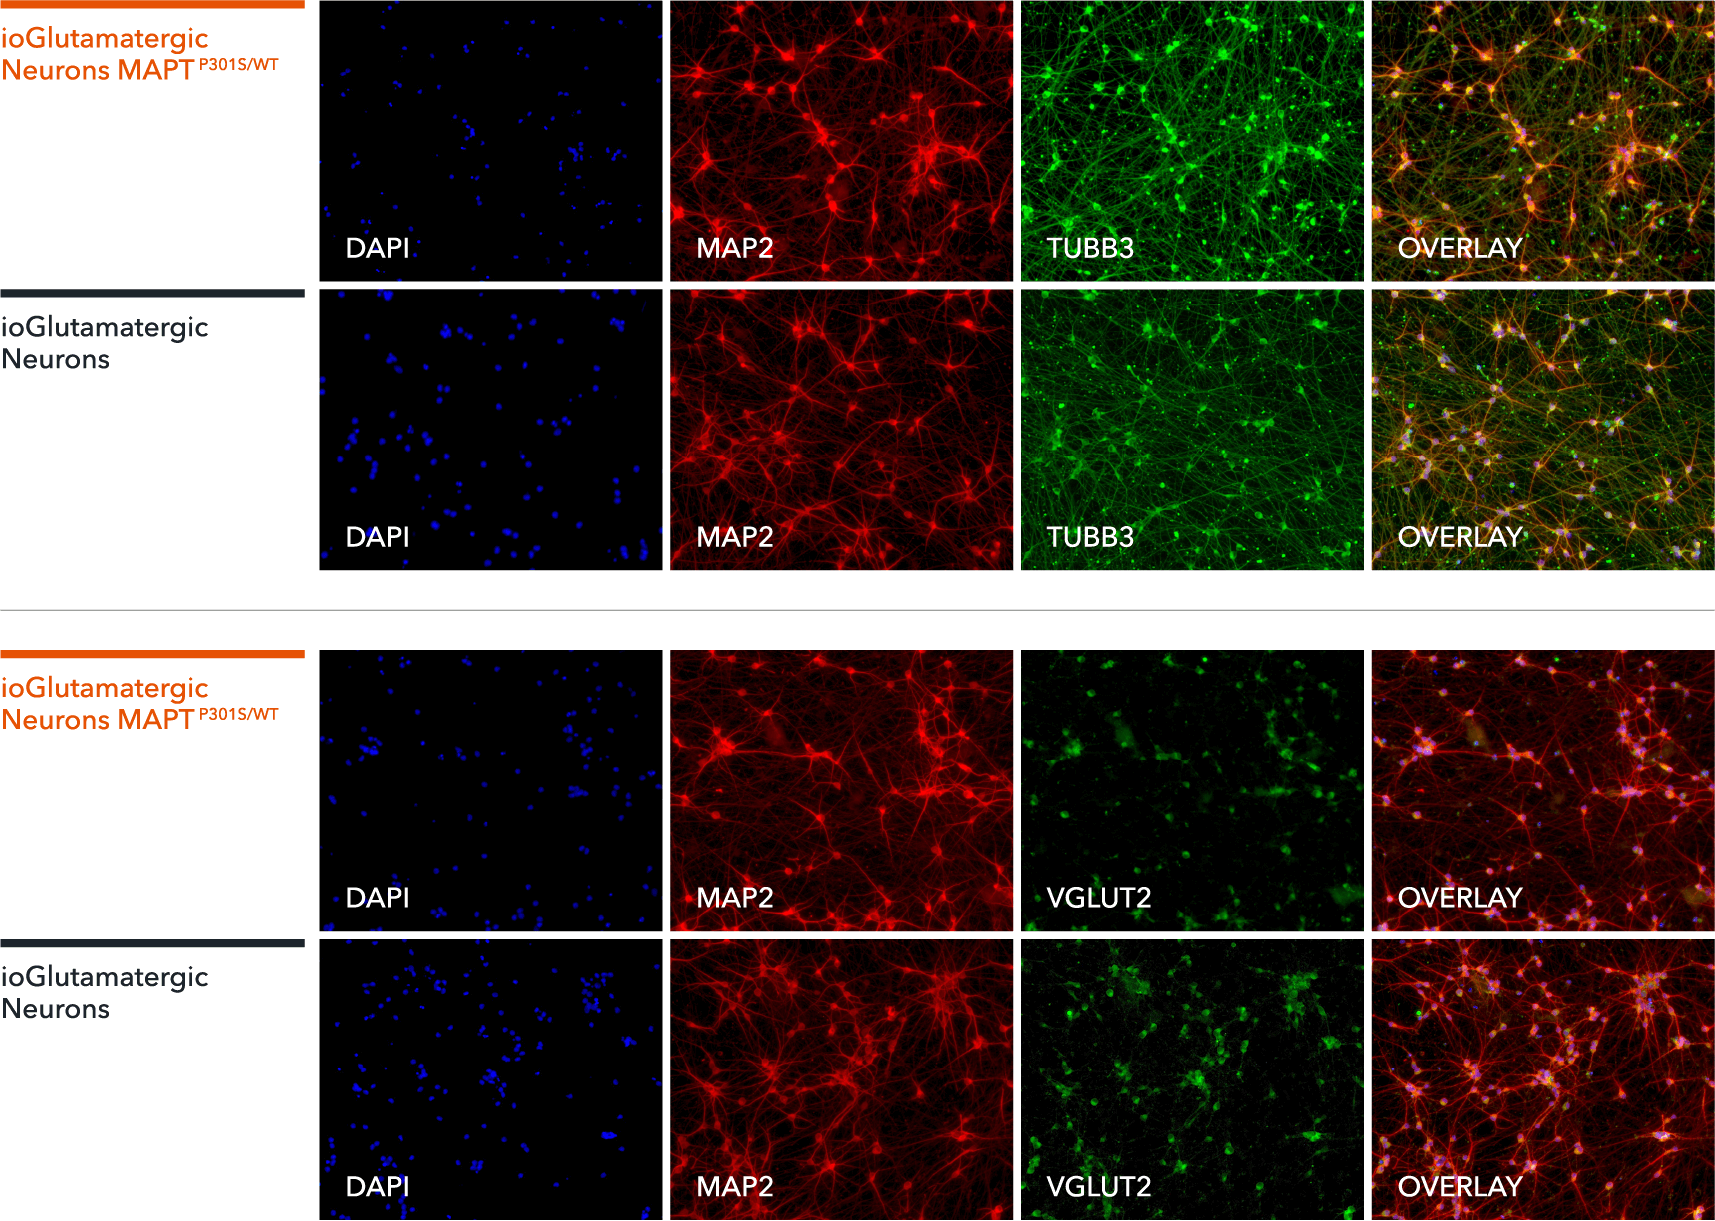 ioGlutamatergic neurons MAPT P301S/WT ICC single channel and overlays